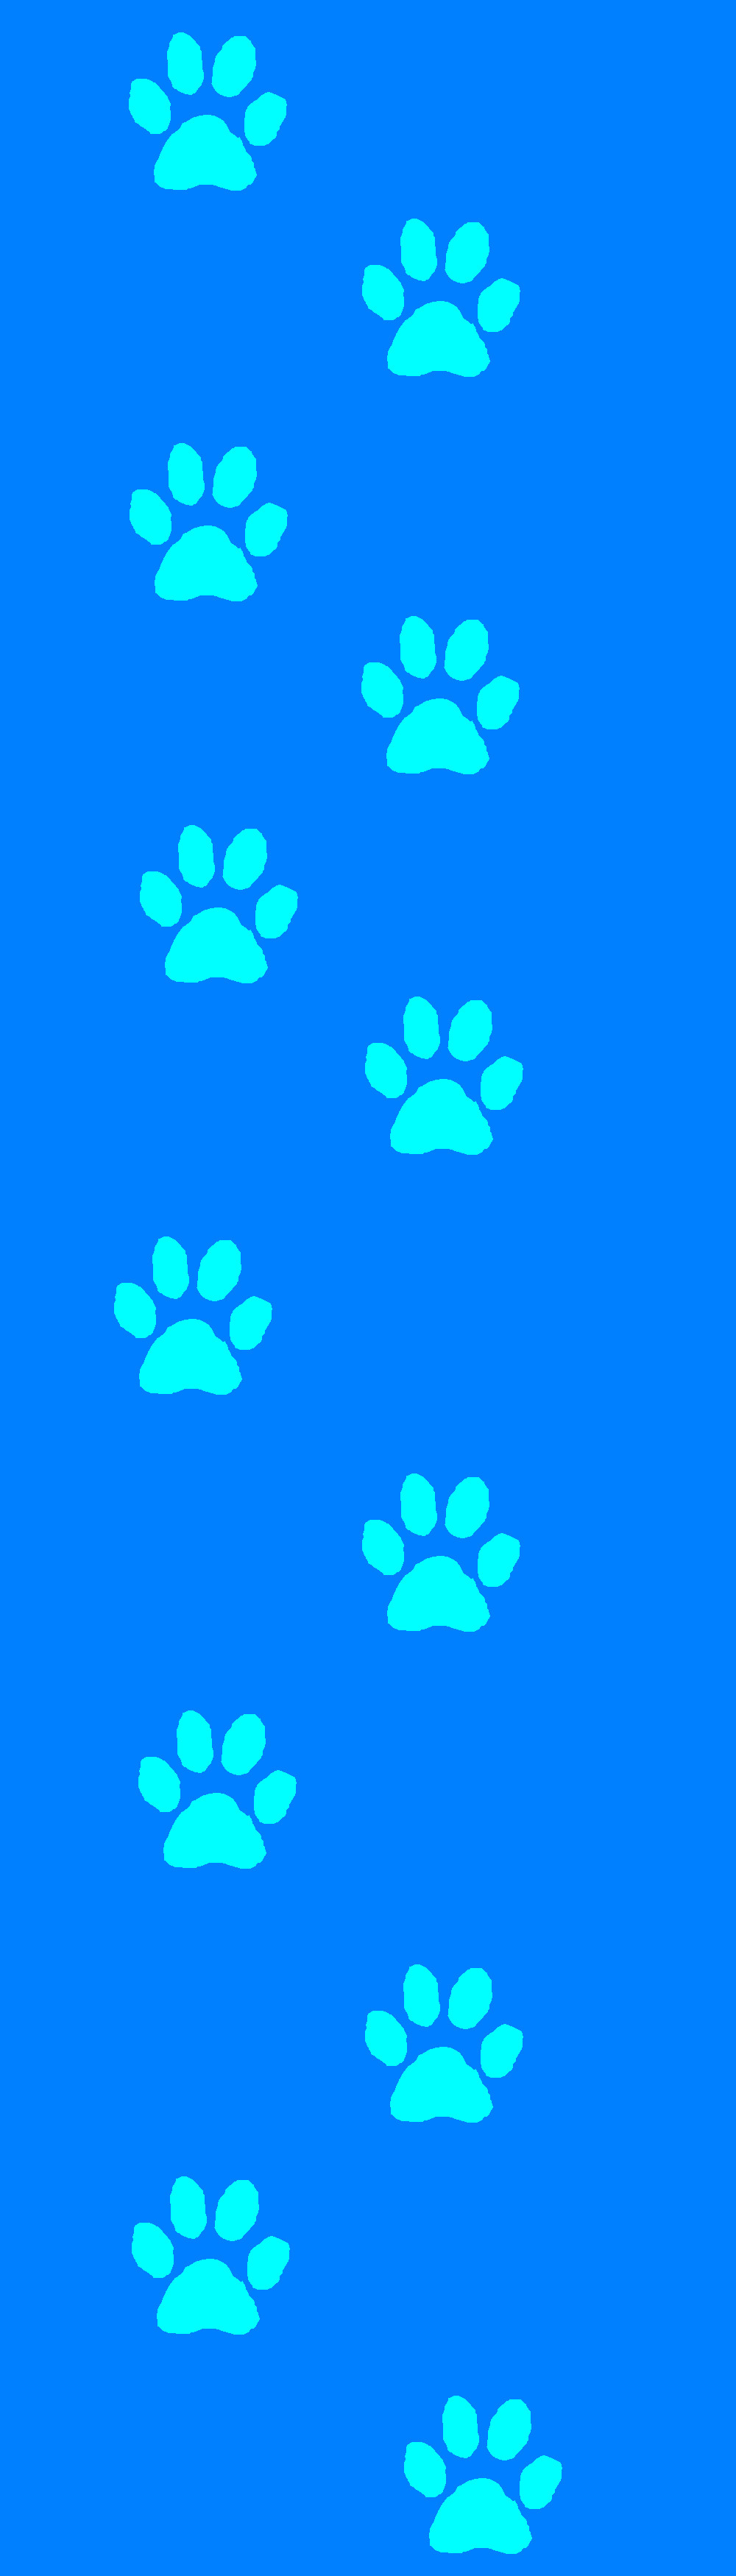 Blue Paw Print Wallpaper Image Pictures Becuo